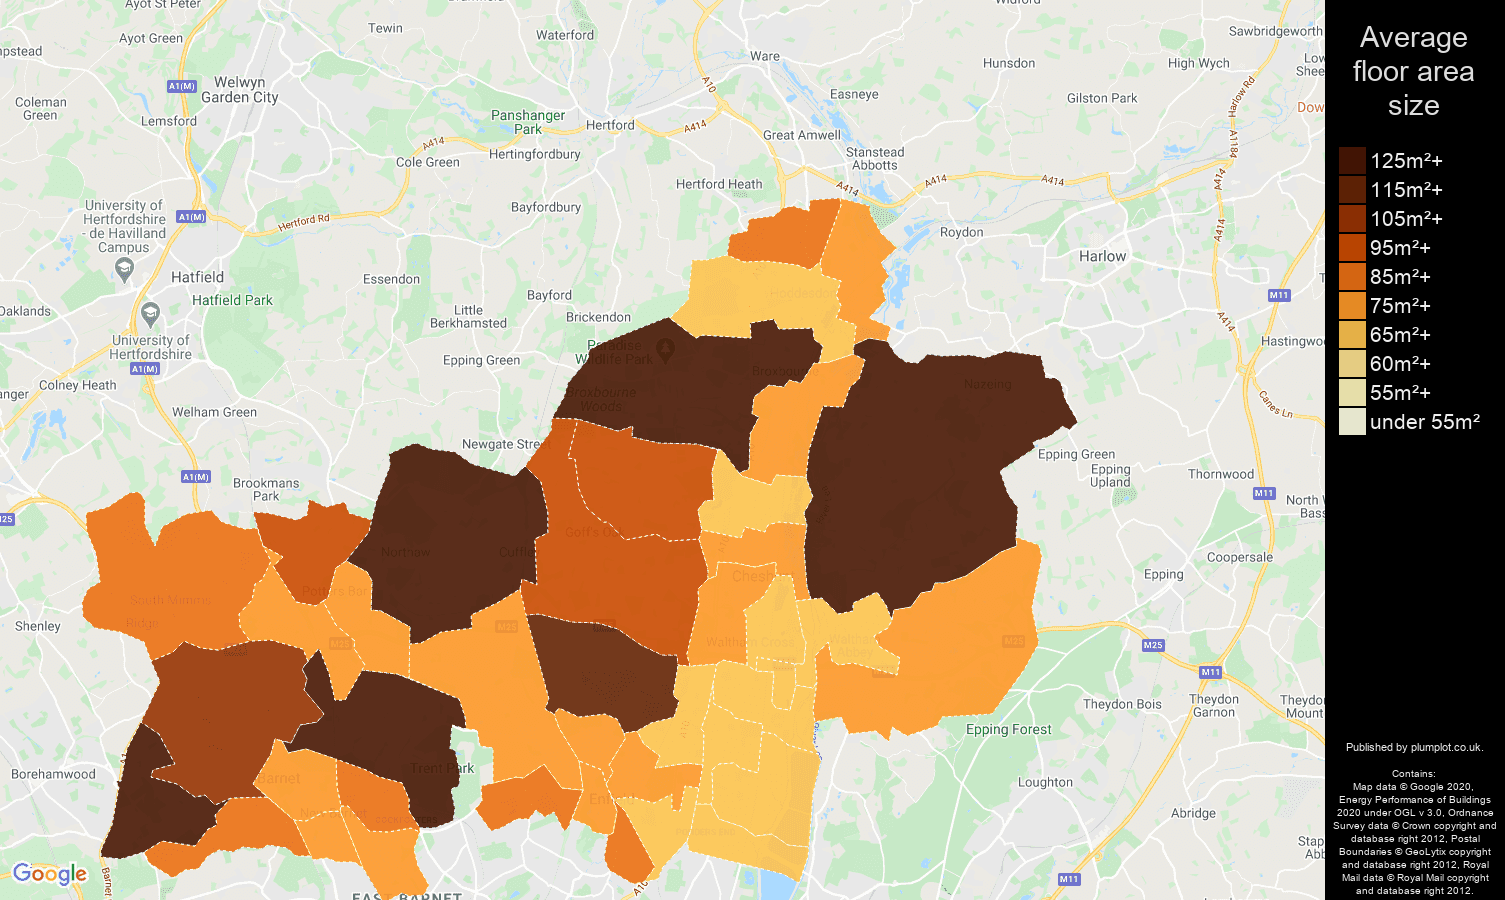 Enfield map of average floor area size of properties